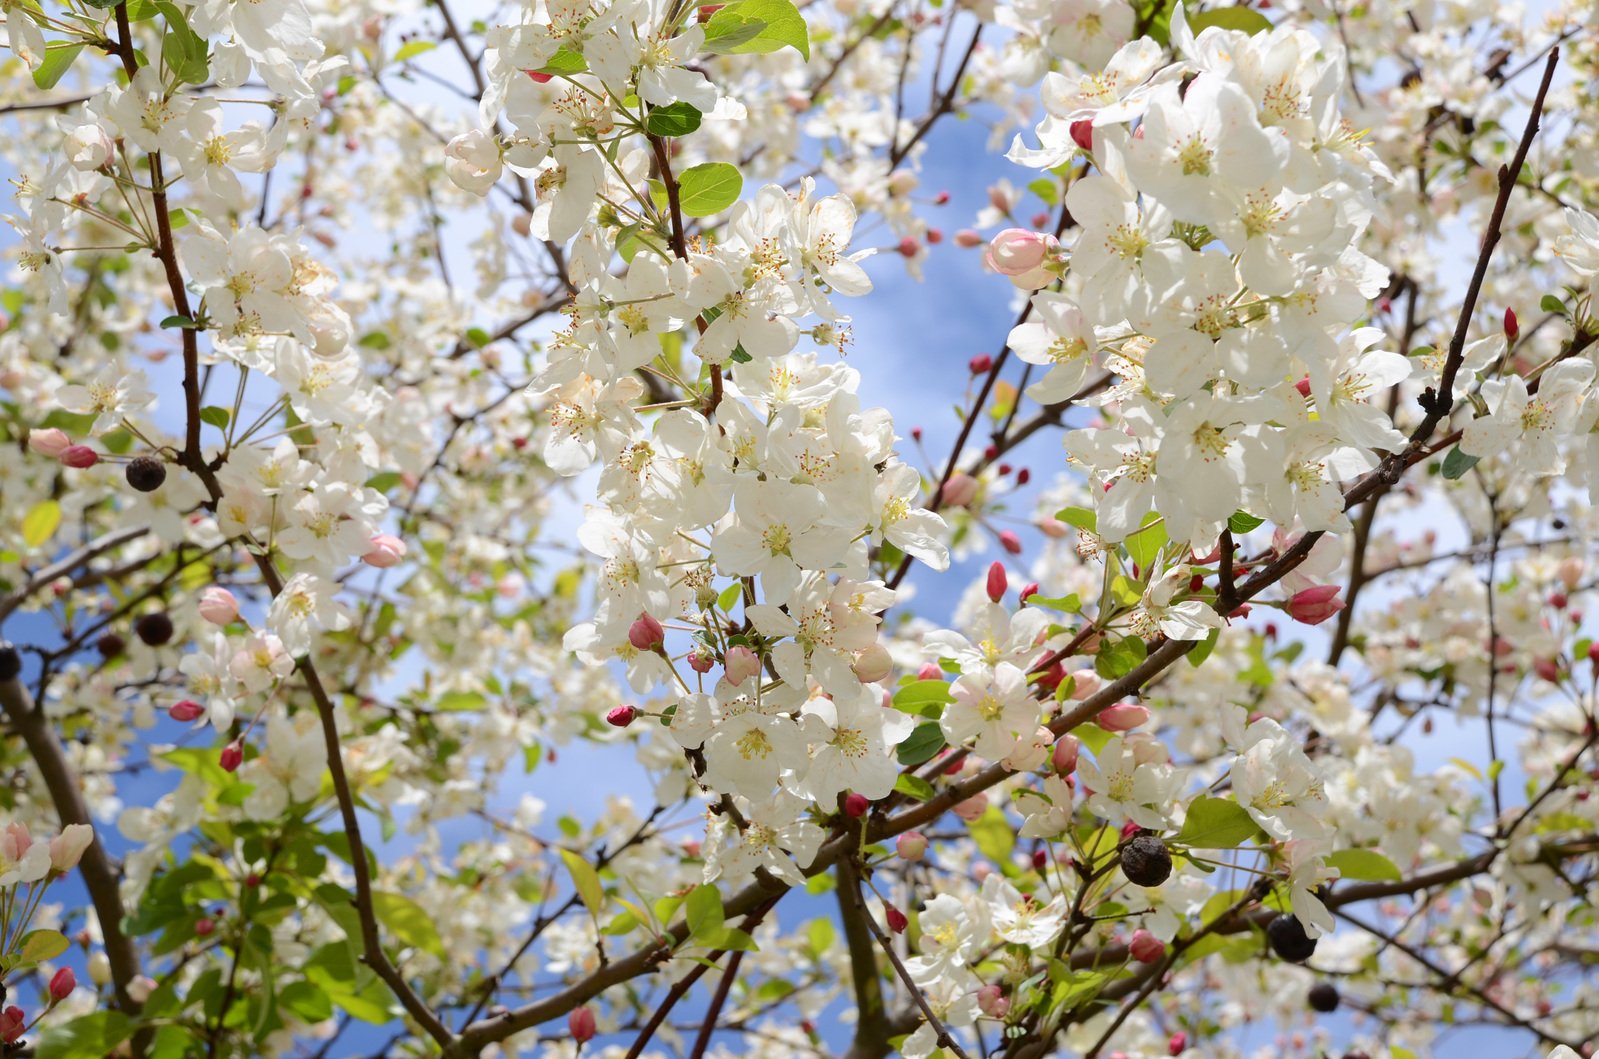 white flowers that have been in bloom and some trees with green leaves